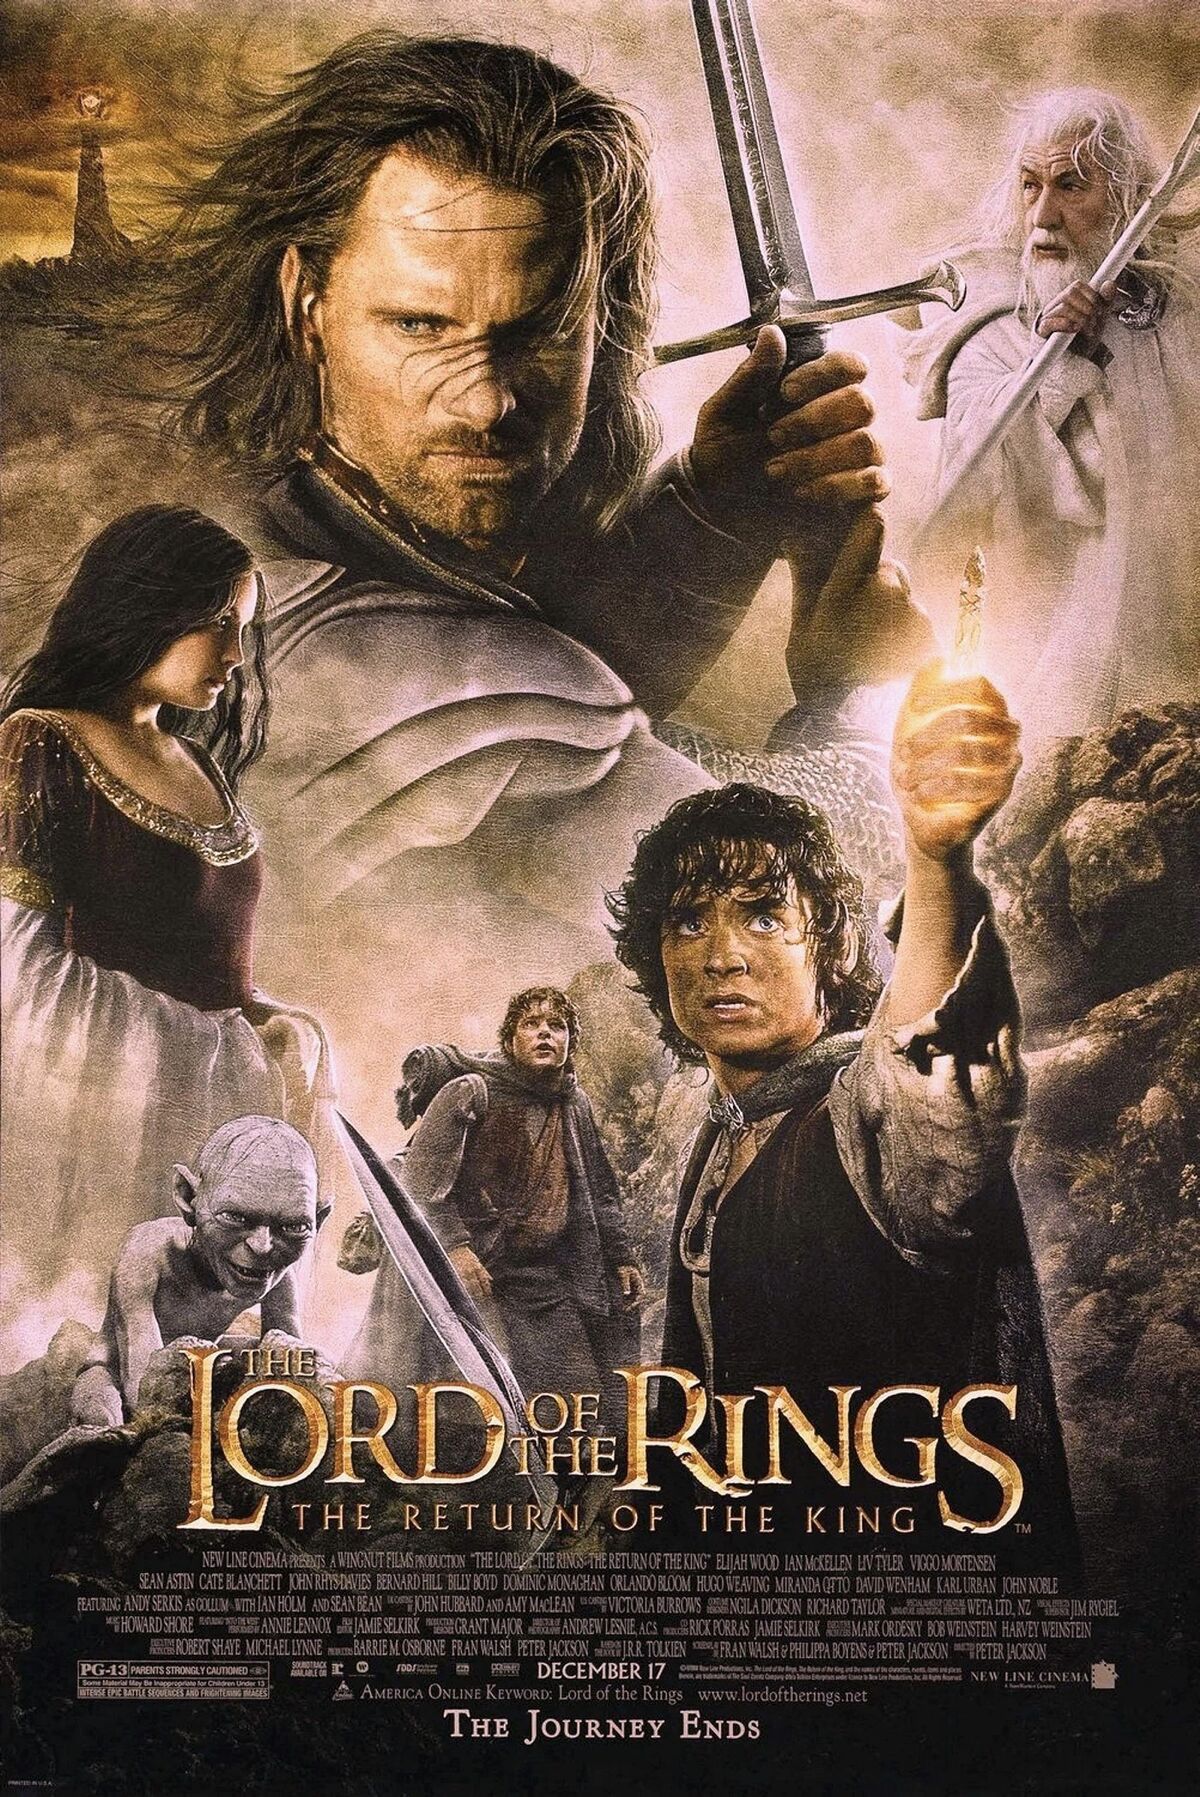 Category:Major characters (The Lord of the Rings), The One Wiki to Rule  Them All